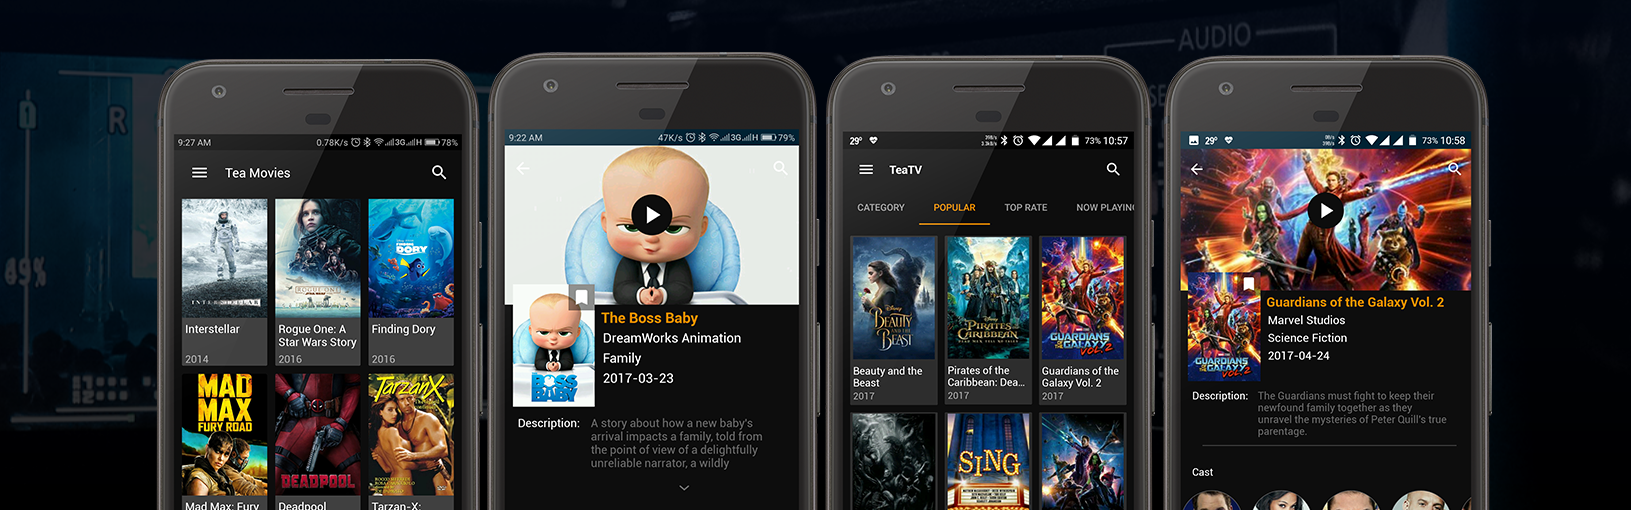 TeaTV APK Official - Download for Android, Windows and iOS